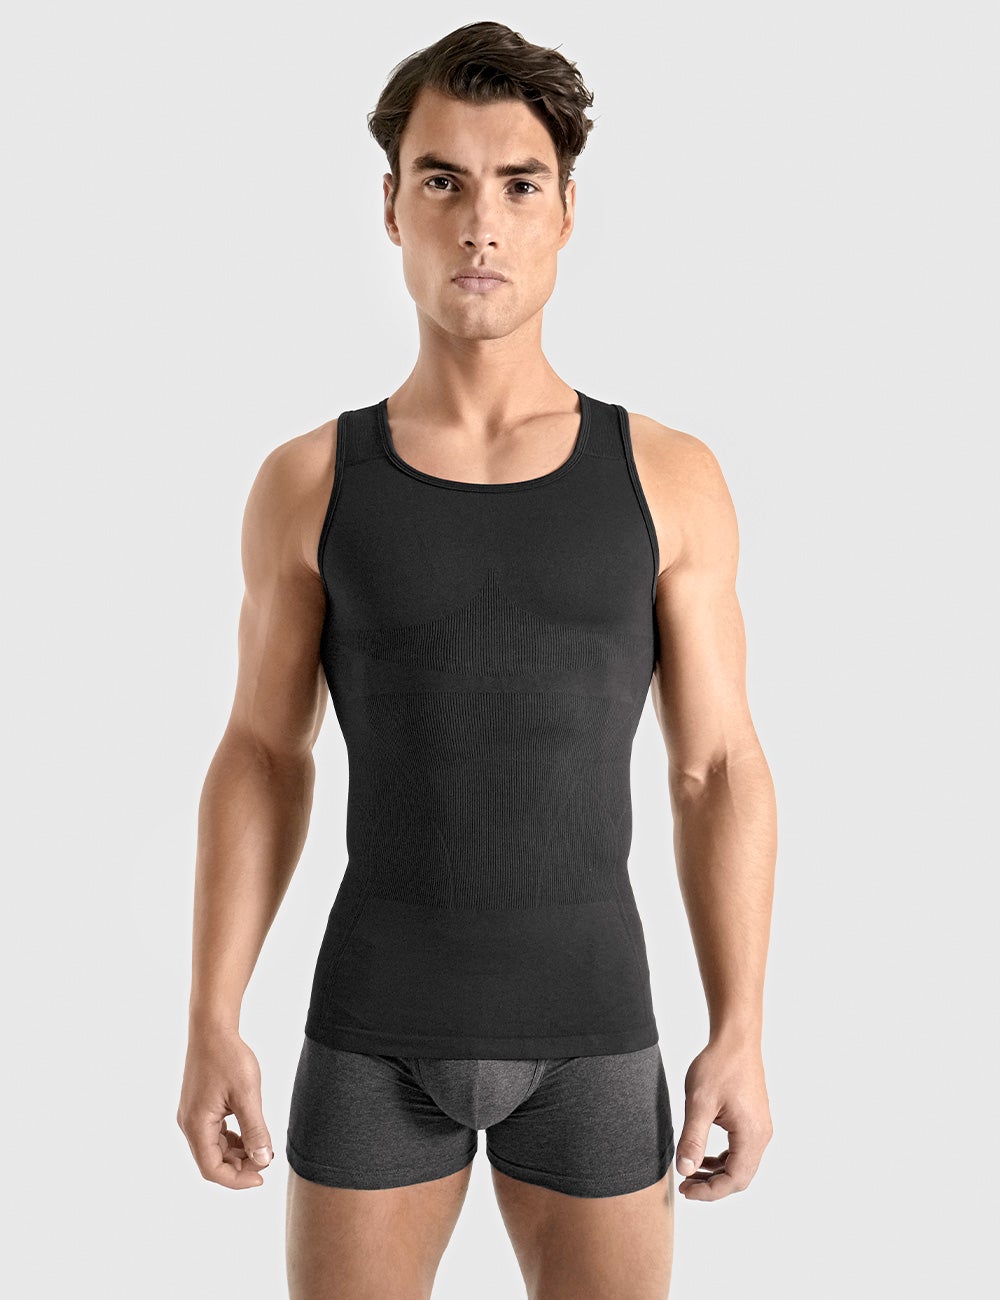 Two Compression Tank Tops Brand New